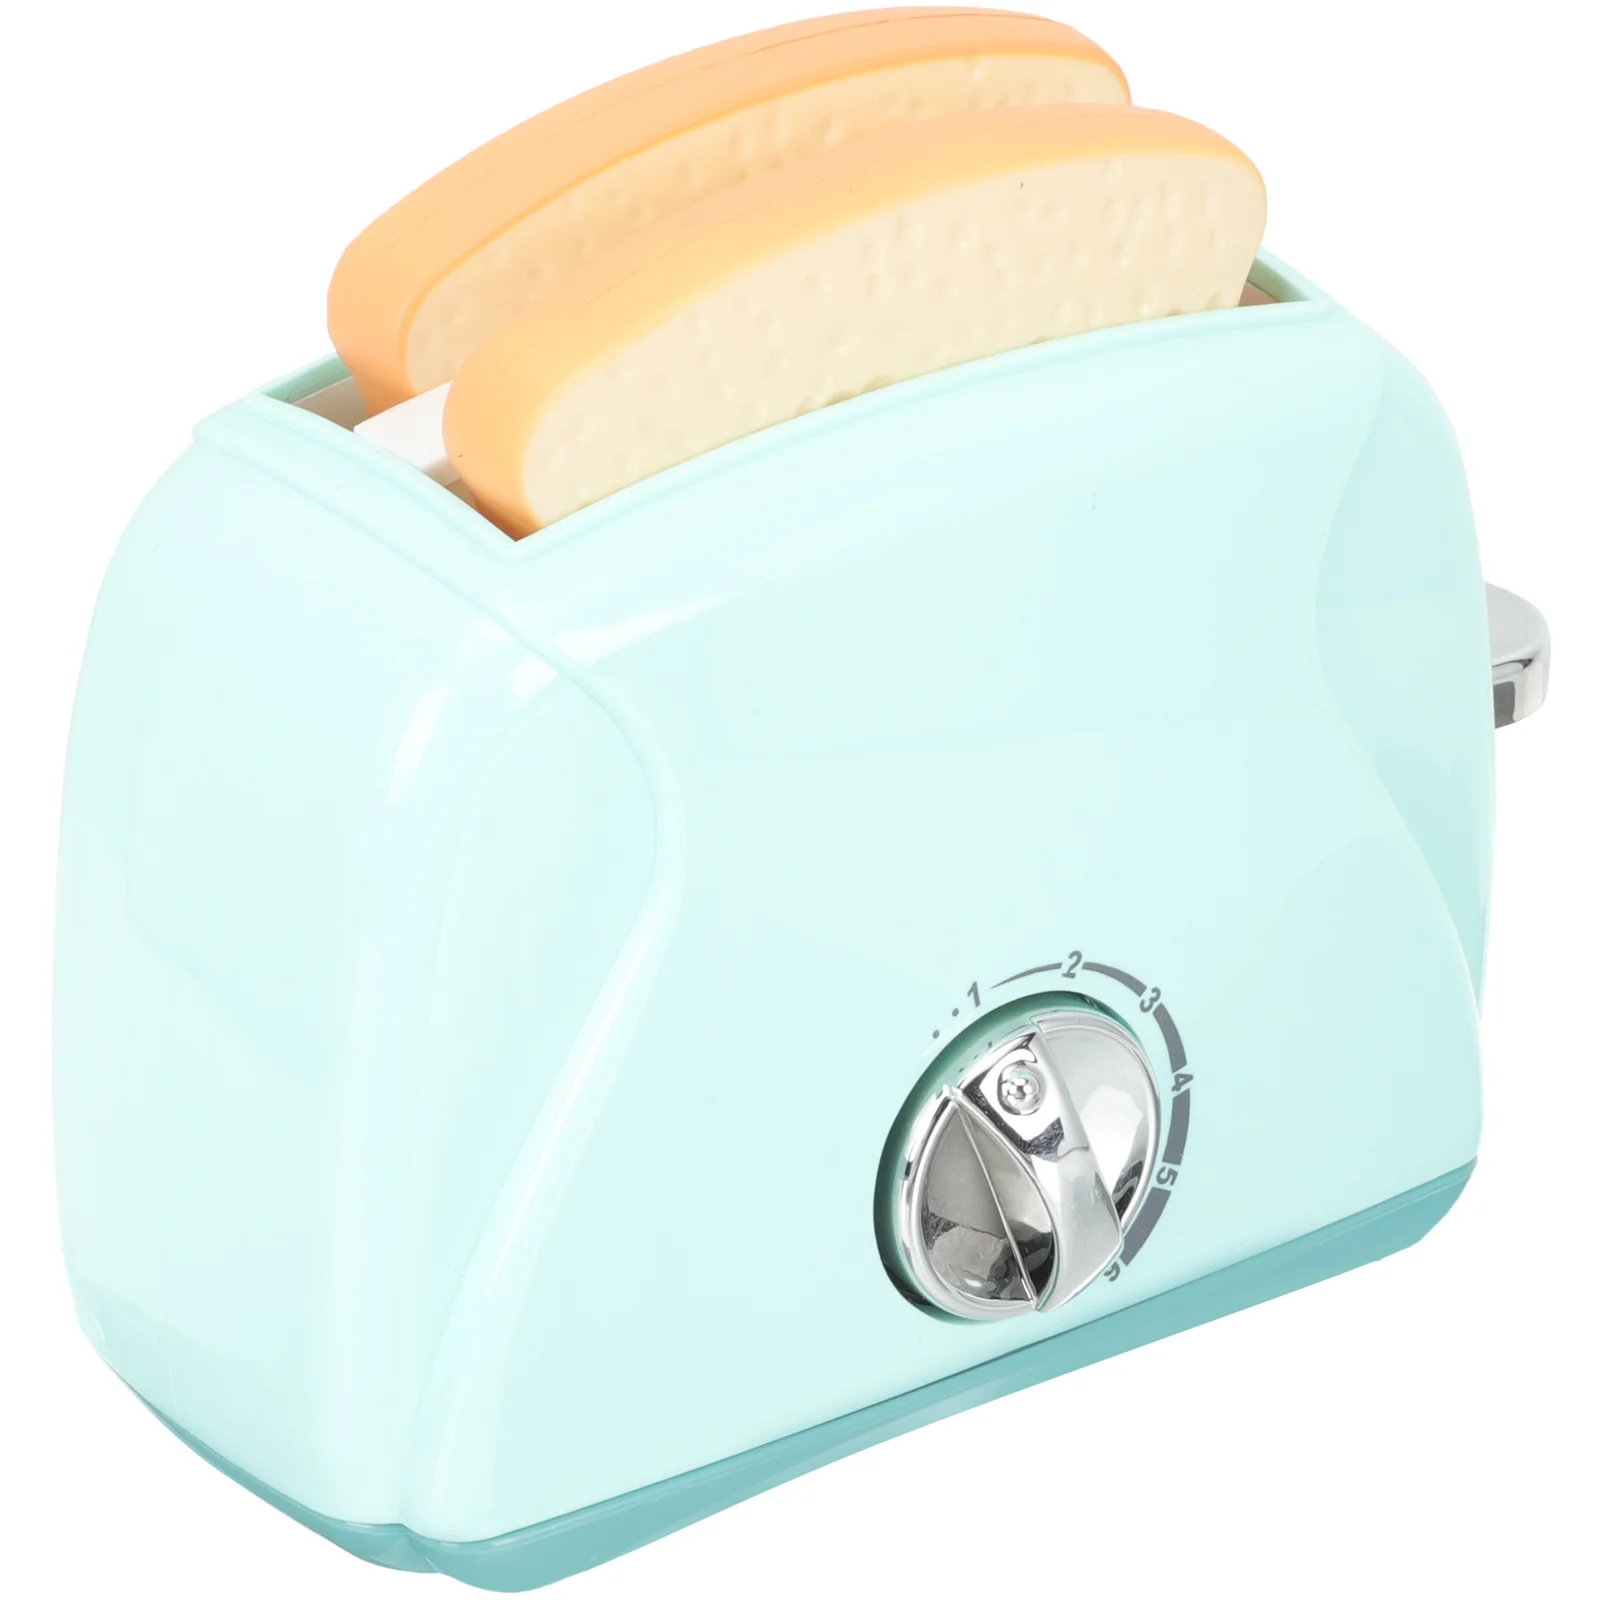 

Bread Machine Kidcraft Playset Kitchen Appliances Kids Large Toaster Plastic Pop Up Toy Accessories Child Cooking Toys